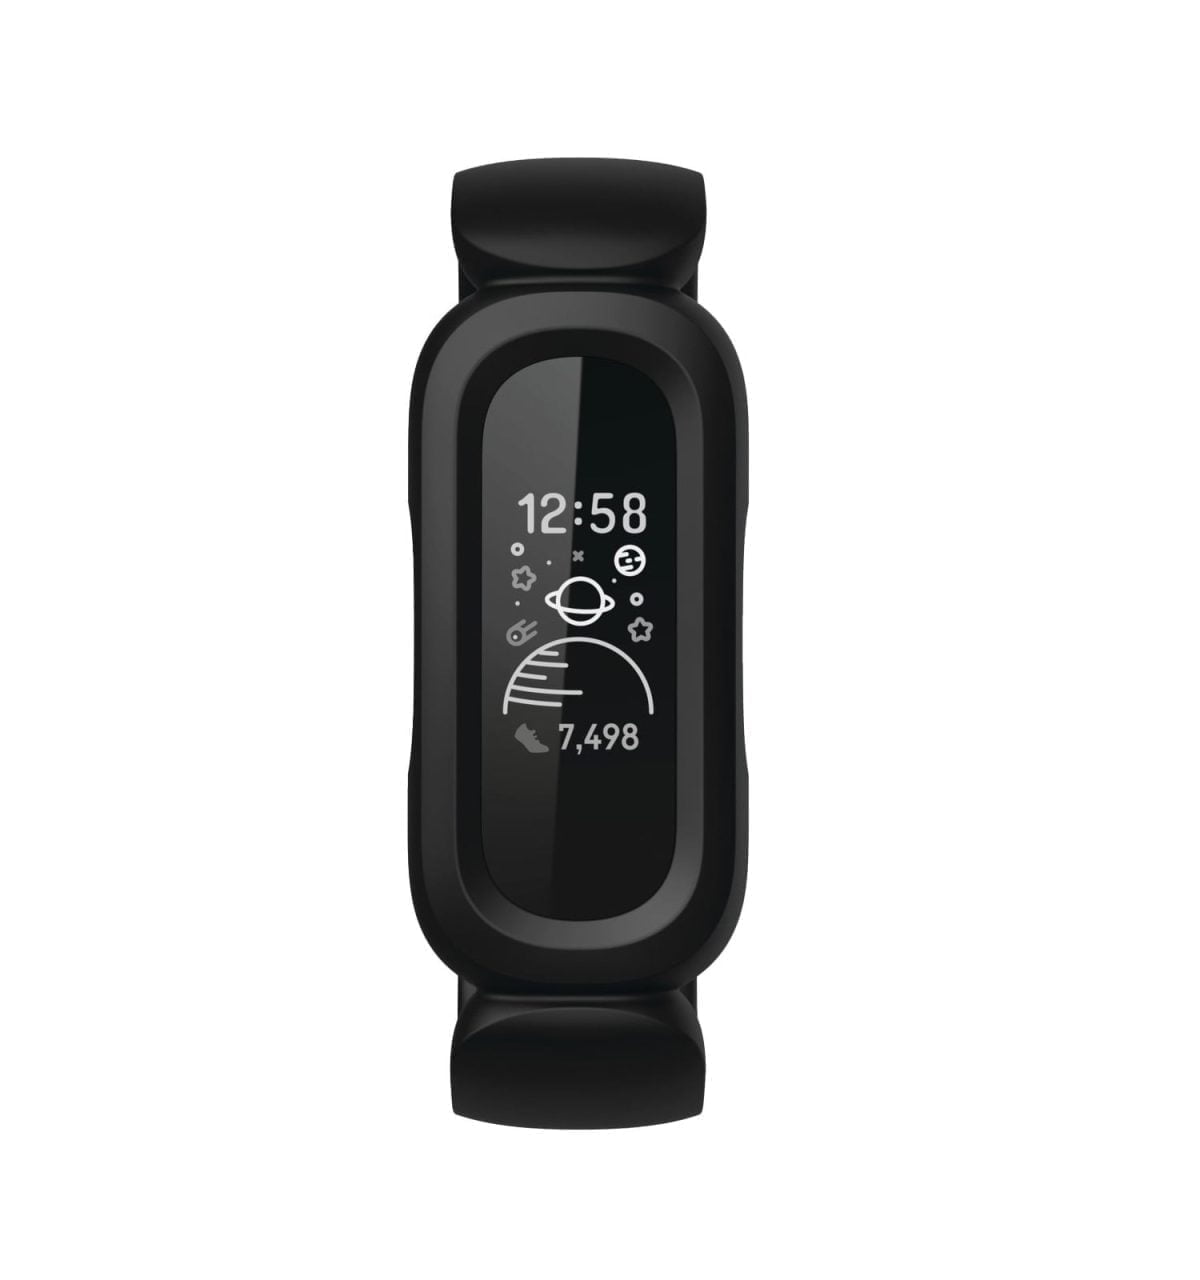 6453259 Sd Fitbit &Lt;H1&Gt;Fitbit - Ace 3 Activity Tracker For Kids - Black/ Sport Red&Lt;/H1&Gt; Https://Www.youtube.com/Watch?V=Rtnv4Kzcz5E Get Kids Moving And Make Fitness Fun With Fitbit Ace 3. With Activity And Sleep Tracking, Fun Challenges And Up To 8 Days Of Battery, Ace 3 Motivates Kids, Friends And Family To Build Healthy Habits Together. Fitbit Ace 3 Fitbit Ace 3 Activity Tracker For Kids - Black/ Sport Red